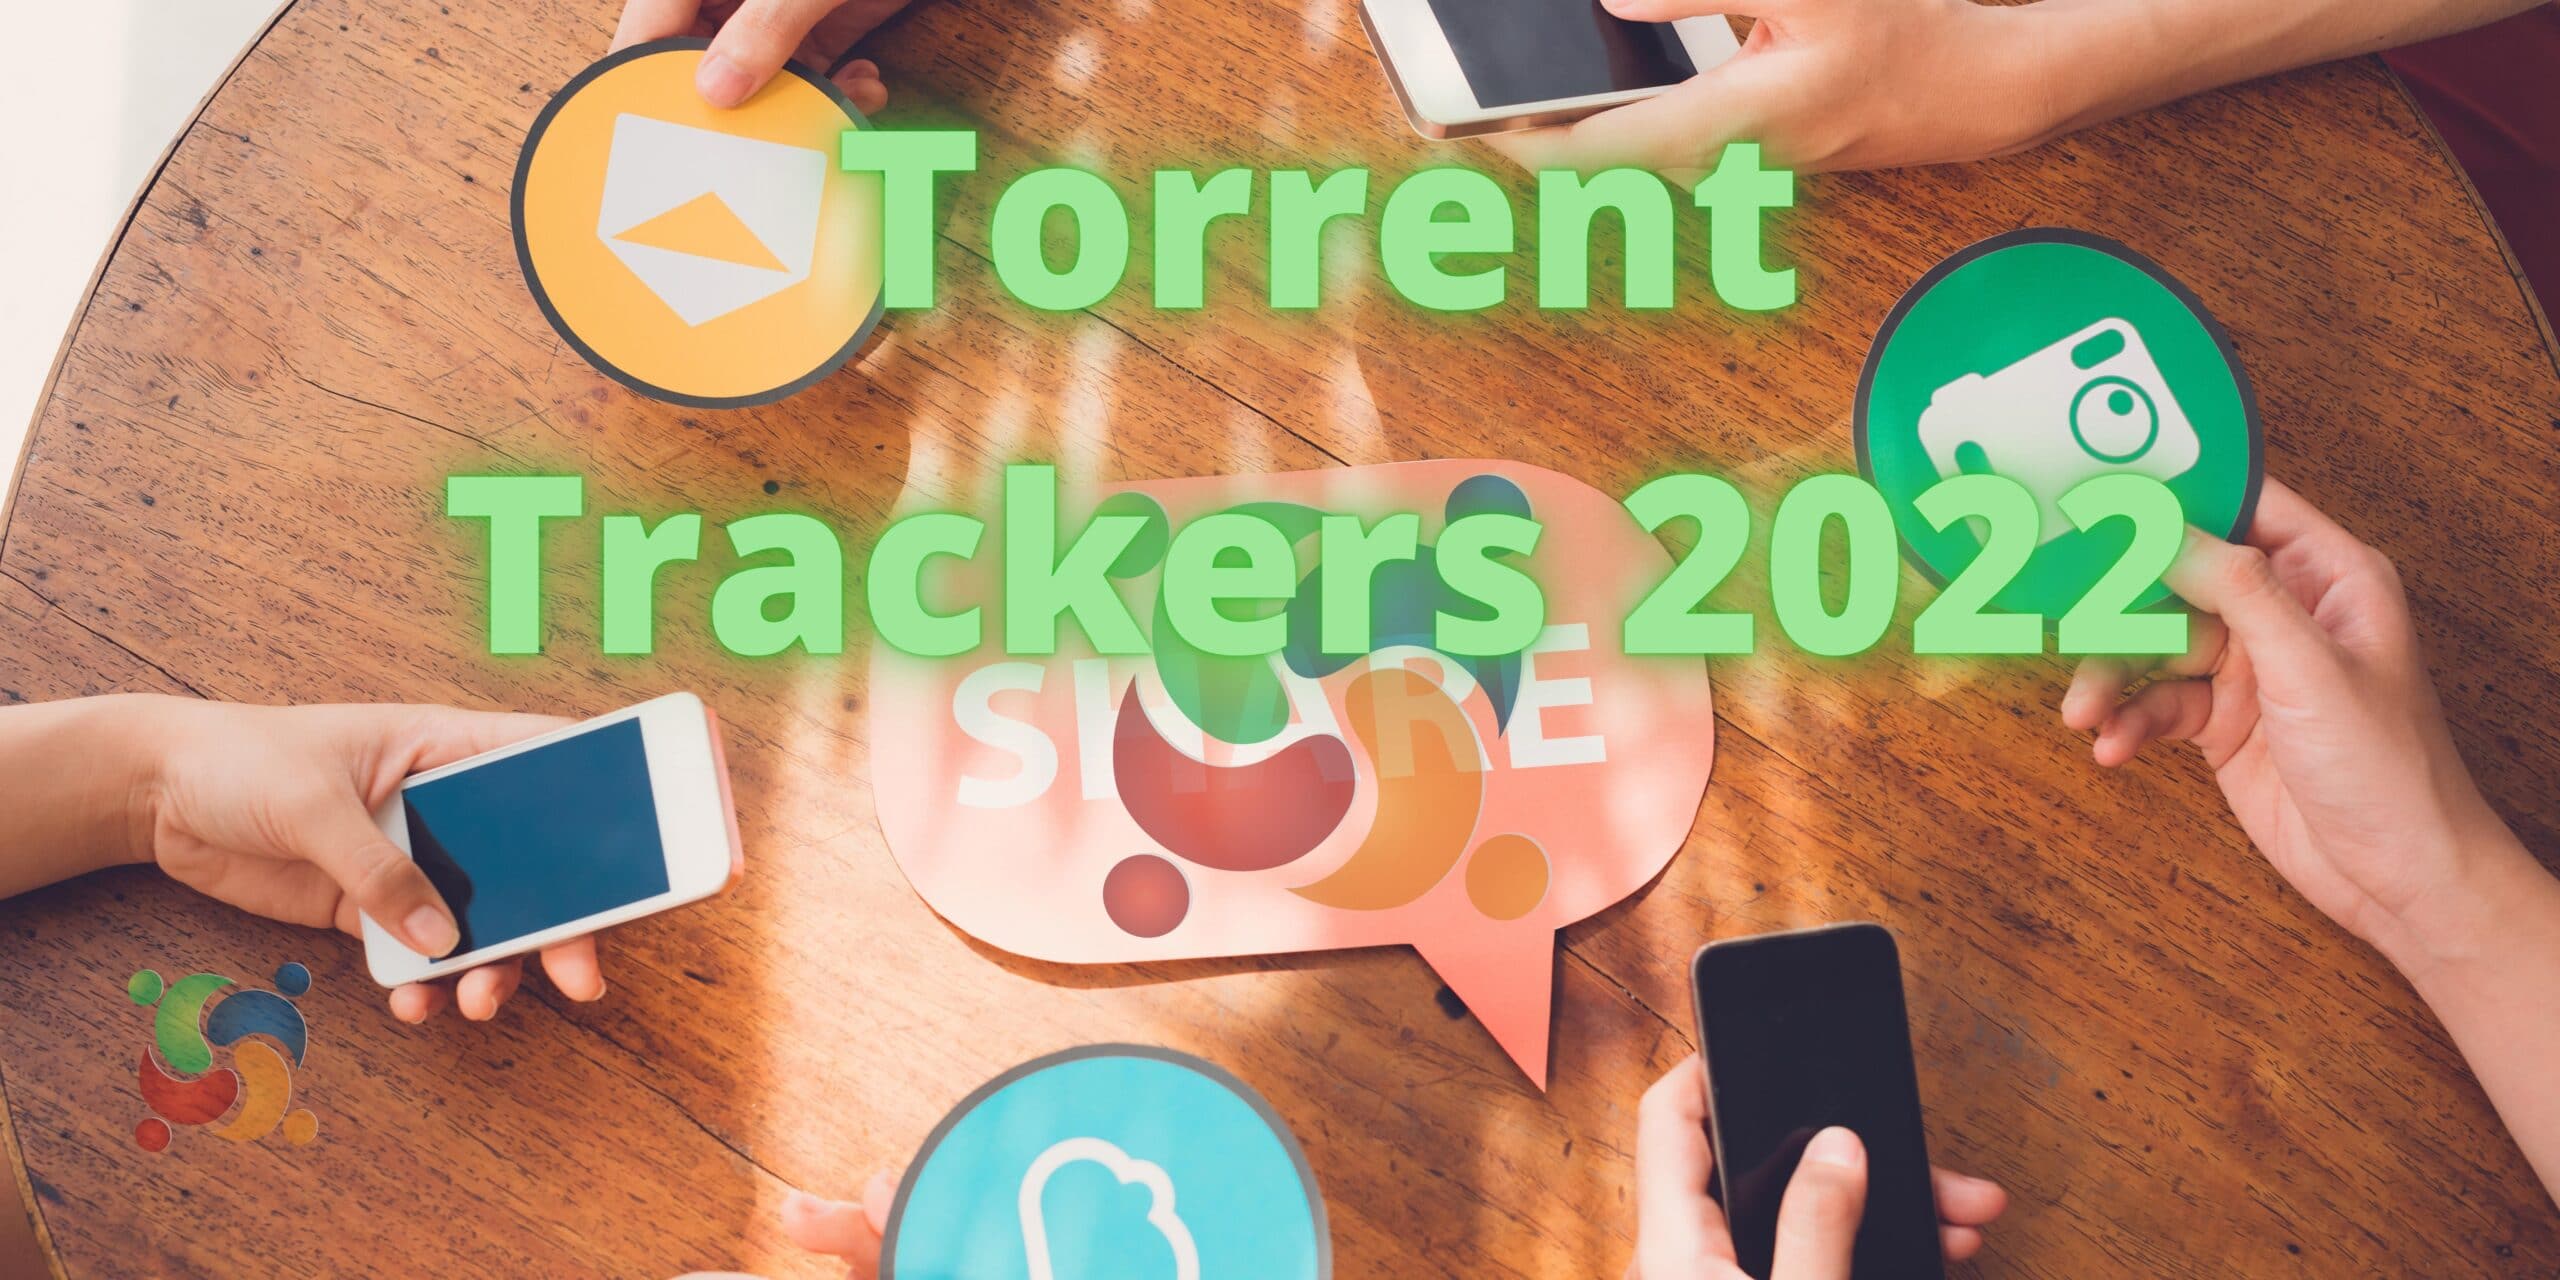 Torrent Trackers List To Increase Downloading Speed In 2023